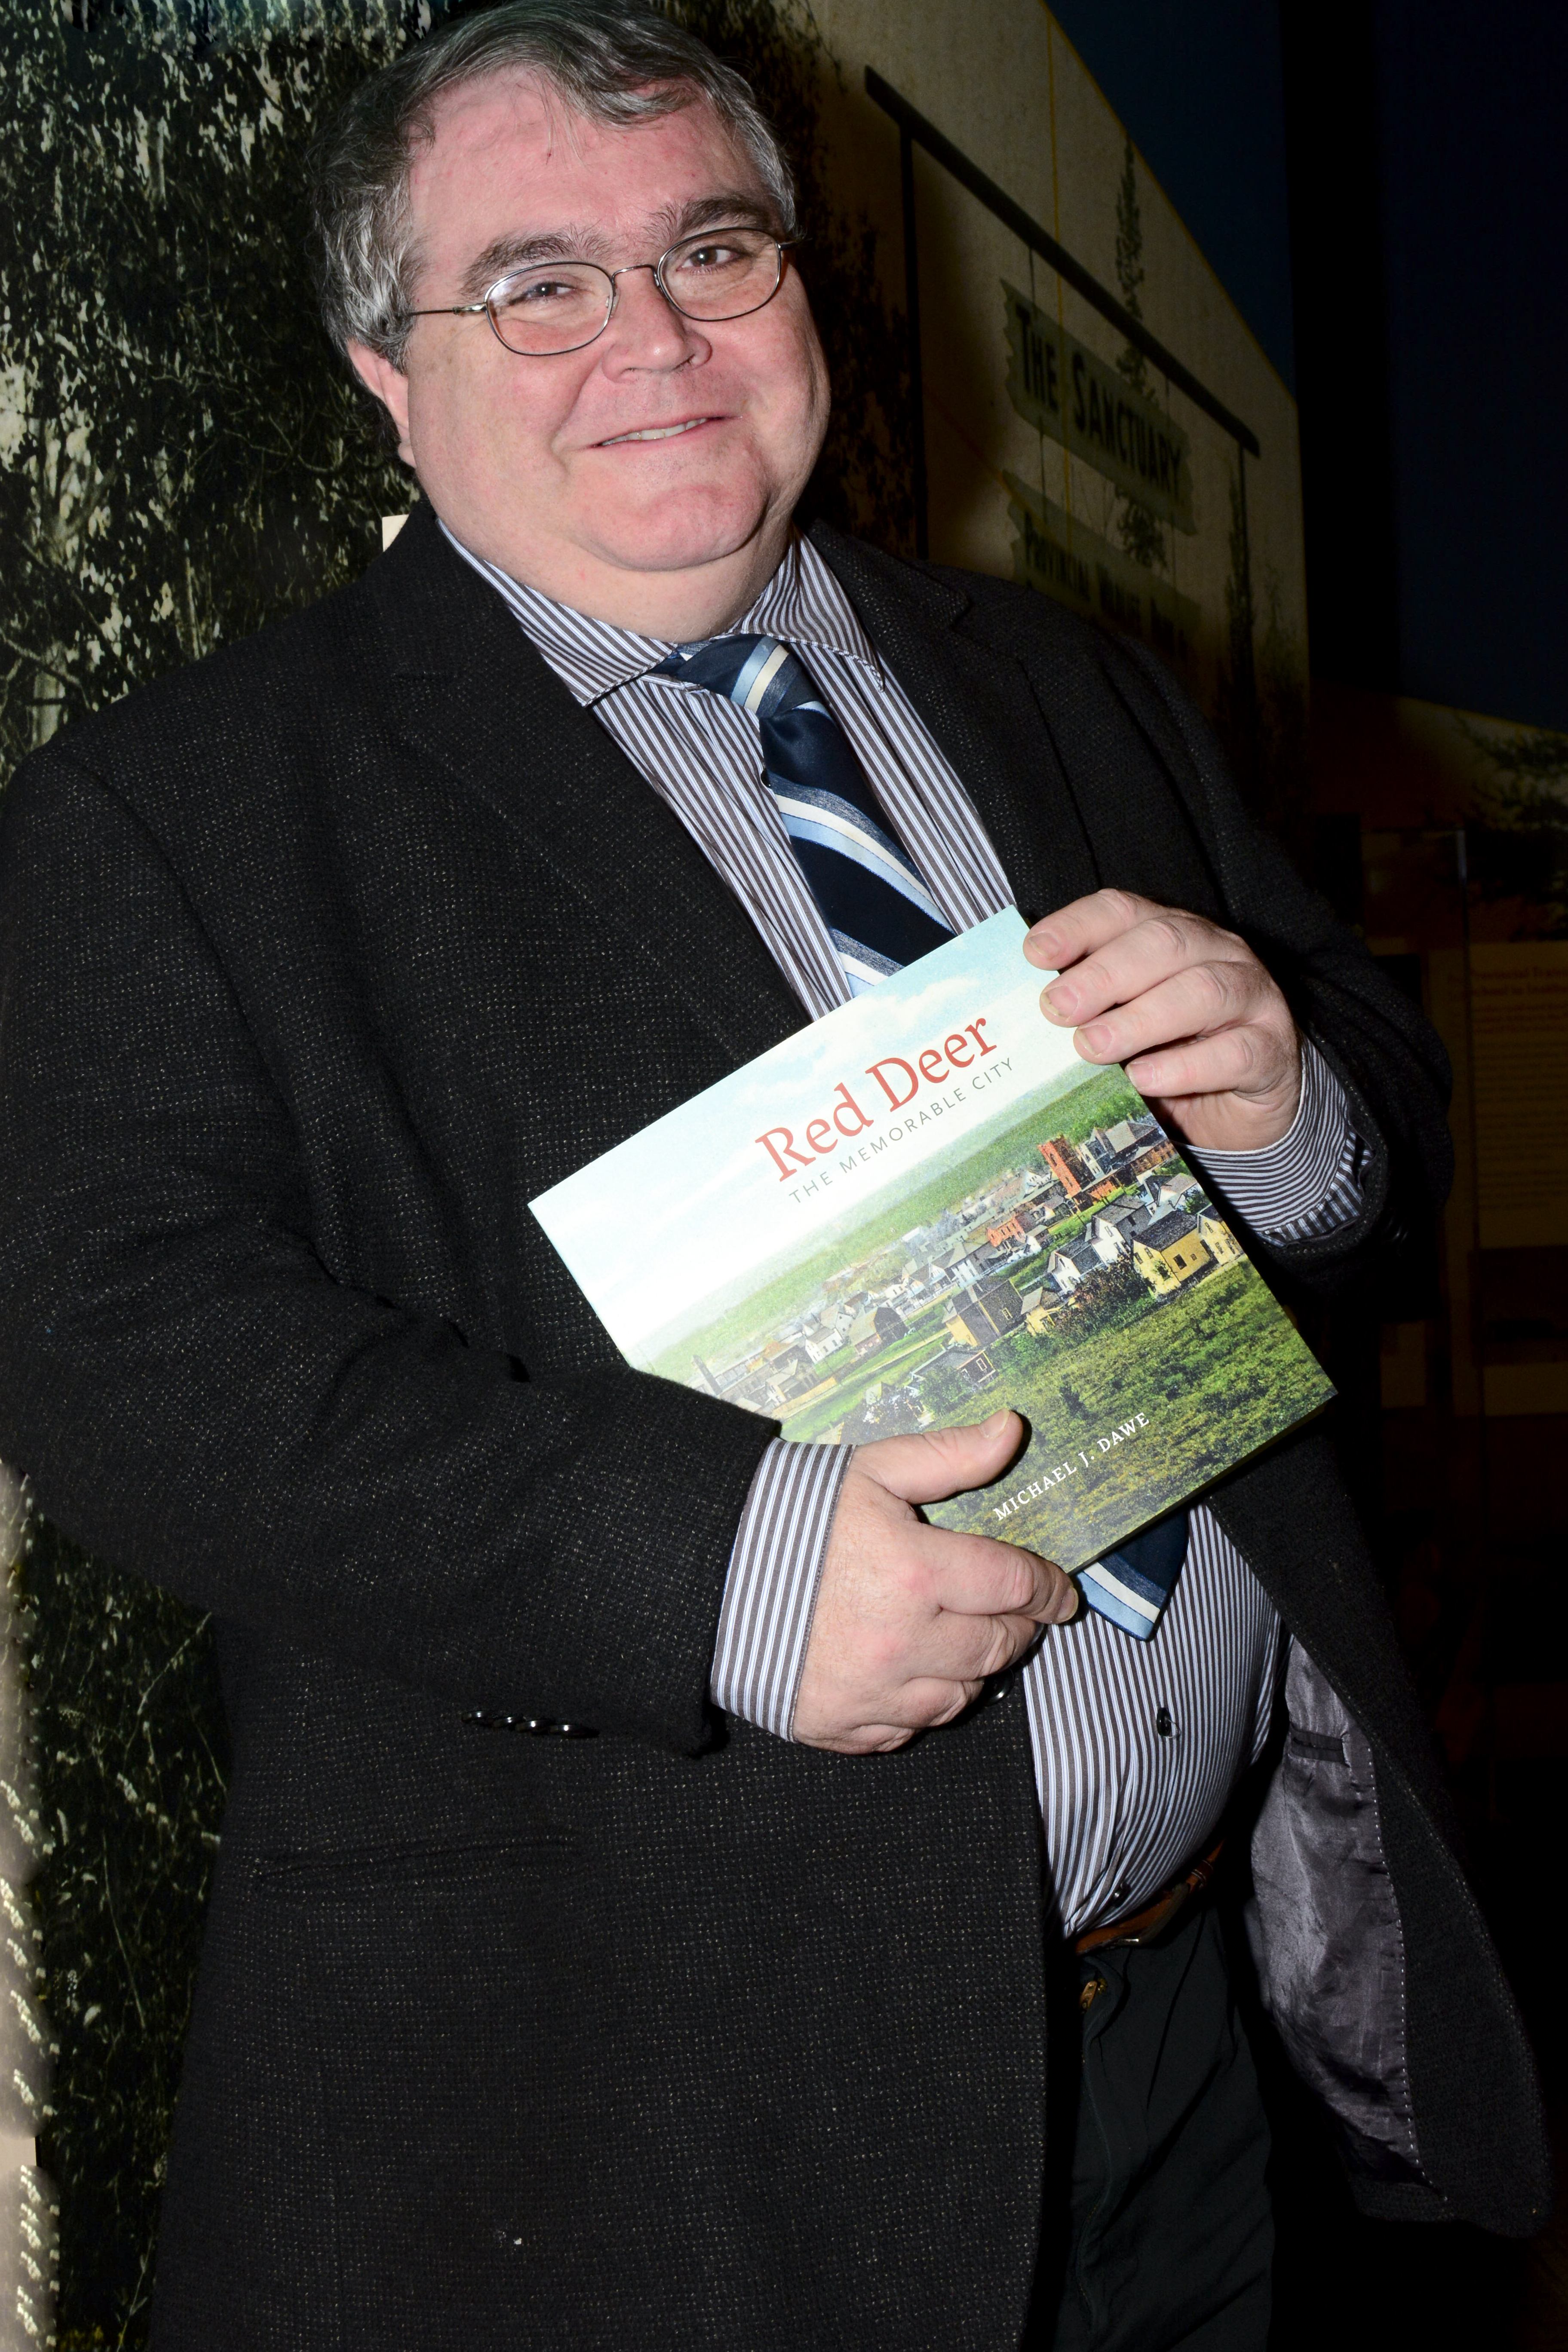 COMMEMORATION - Local historian Michael Dawe shows off the book he wrote